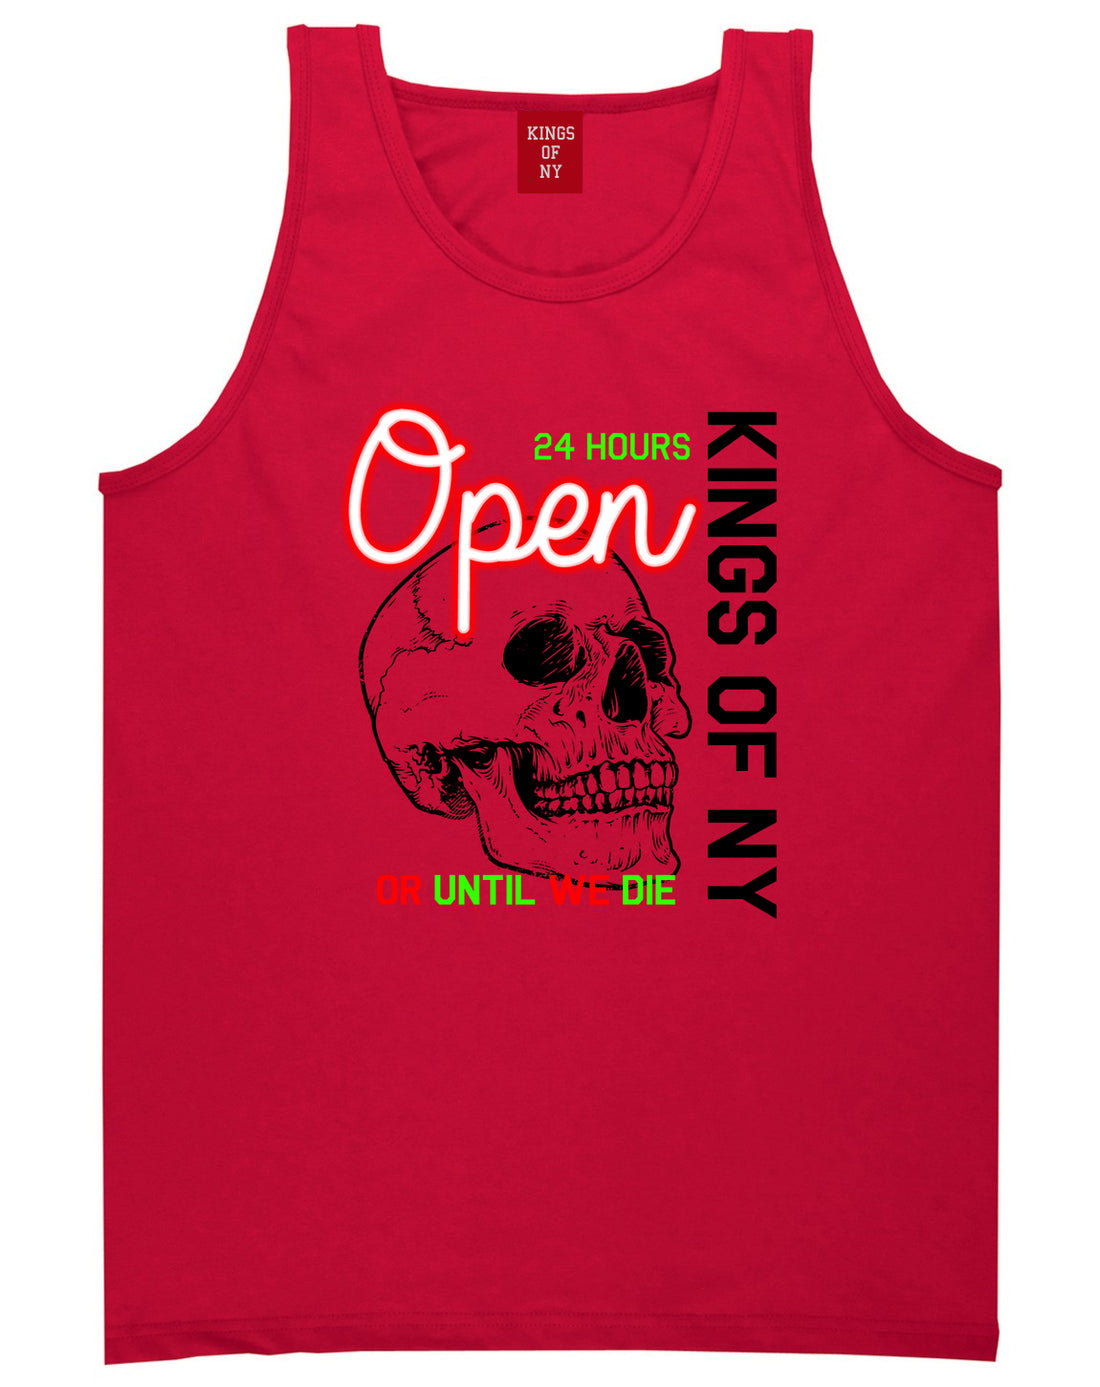 Open 24 Hours Sign Skull Mens Tank Top Shirt Red by Kings Of NY